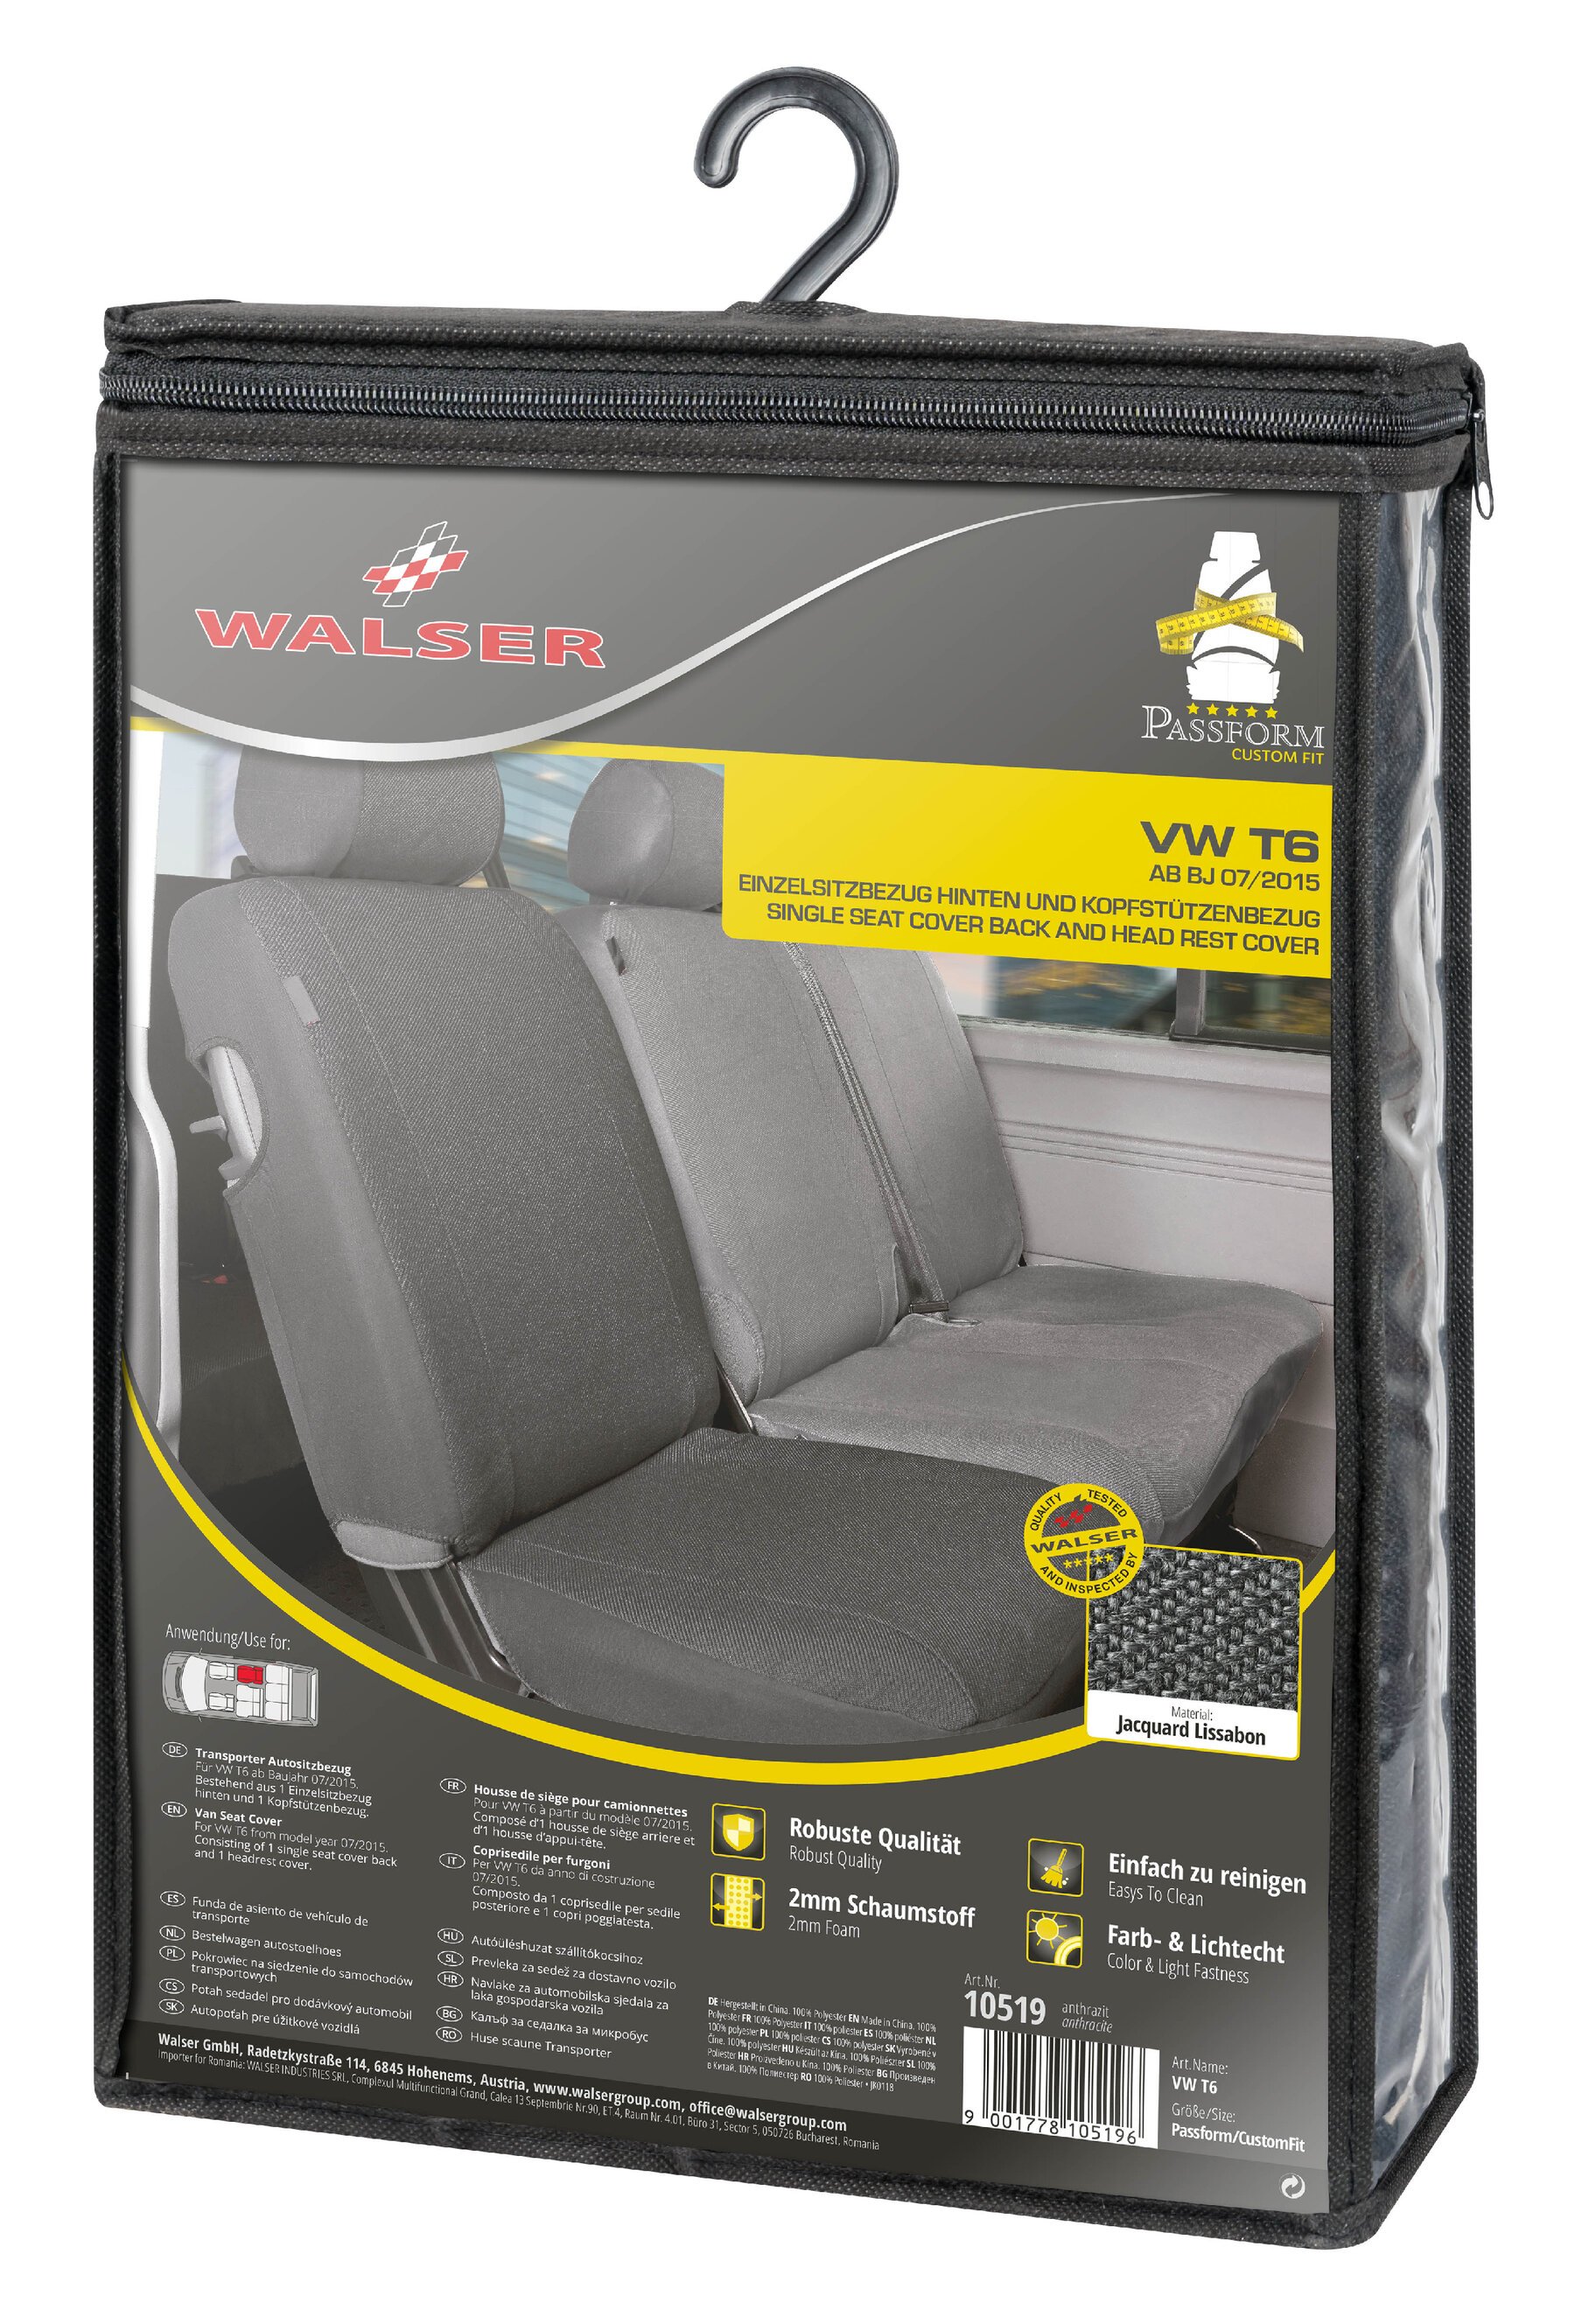 Car Seat cover Transporter made of fabric for VW T6, single seat rear